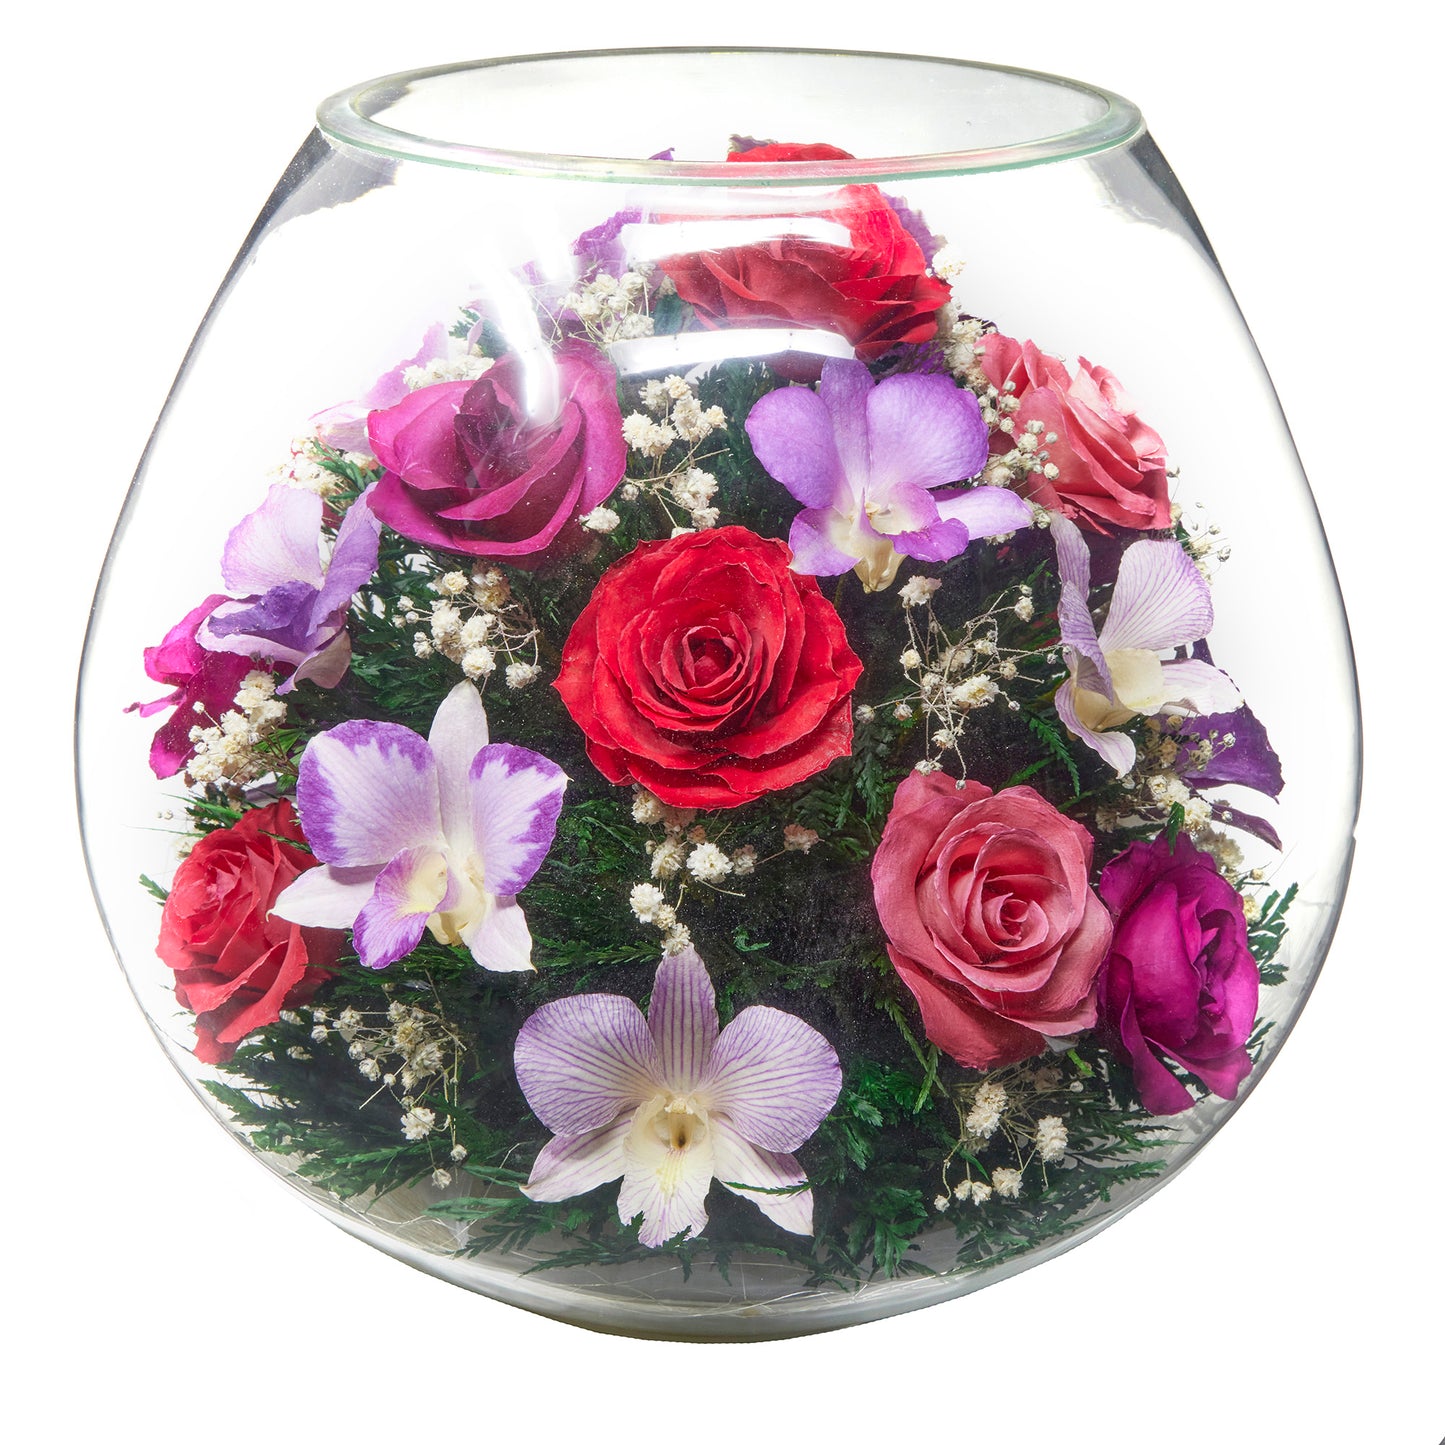 In Flores Veritas: Blossom Brilliance Grand Bowl Vase - Lasts up to 5 Years - Impressive Gift for Any Occasion